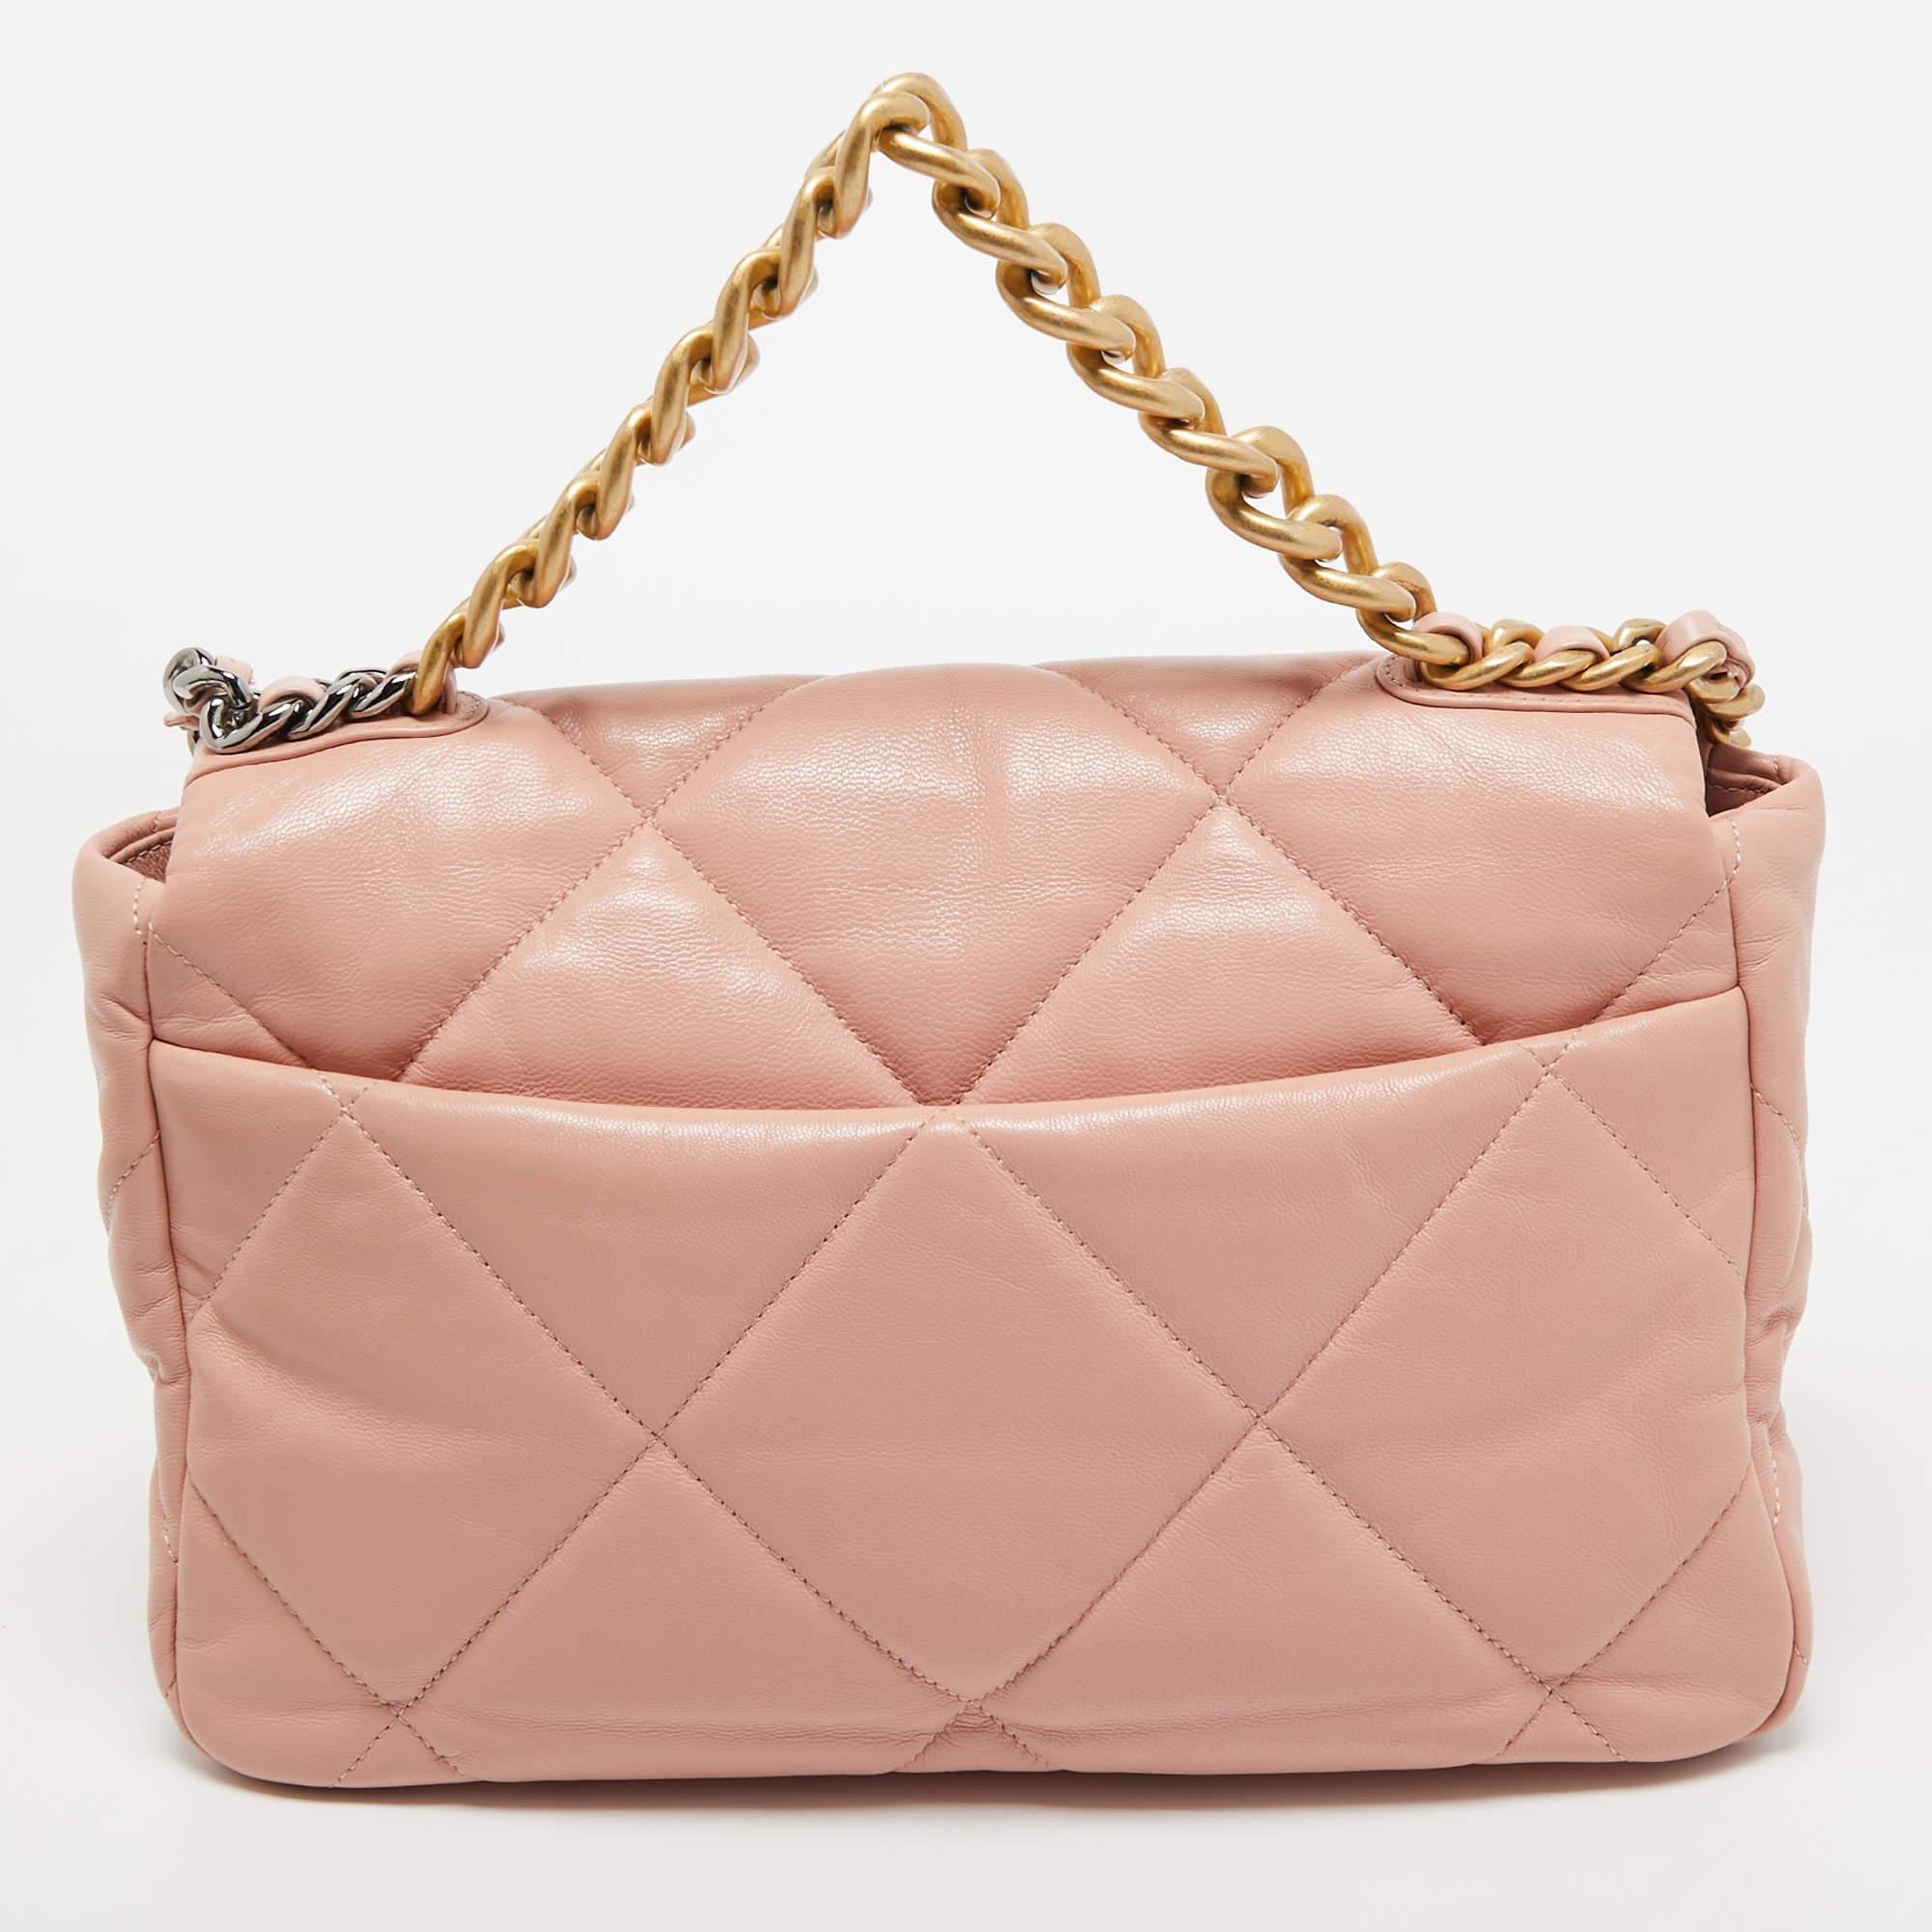 The house of Chanel offers this beautiful 19 flap bag in pink to help you create timeless style edits every season. Crafted with quality materials, this piece will last you a long time.

Includes: Original Dustbag, Authenticity Card, Original Box